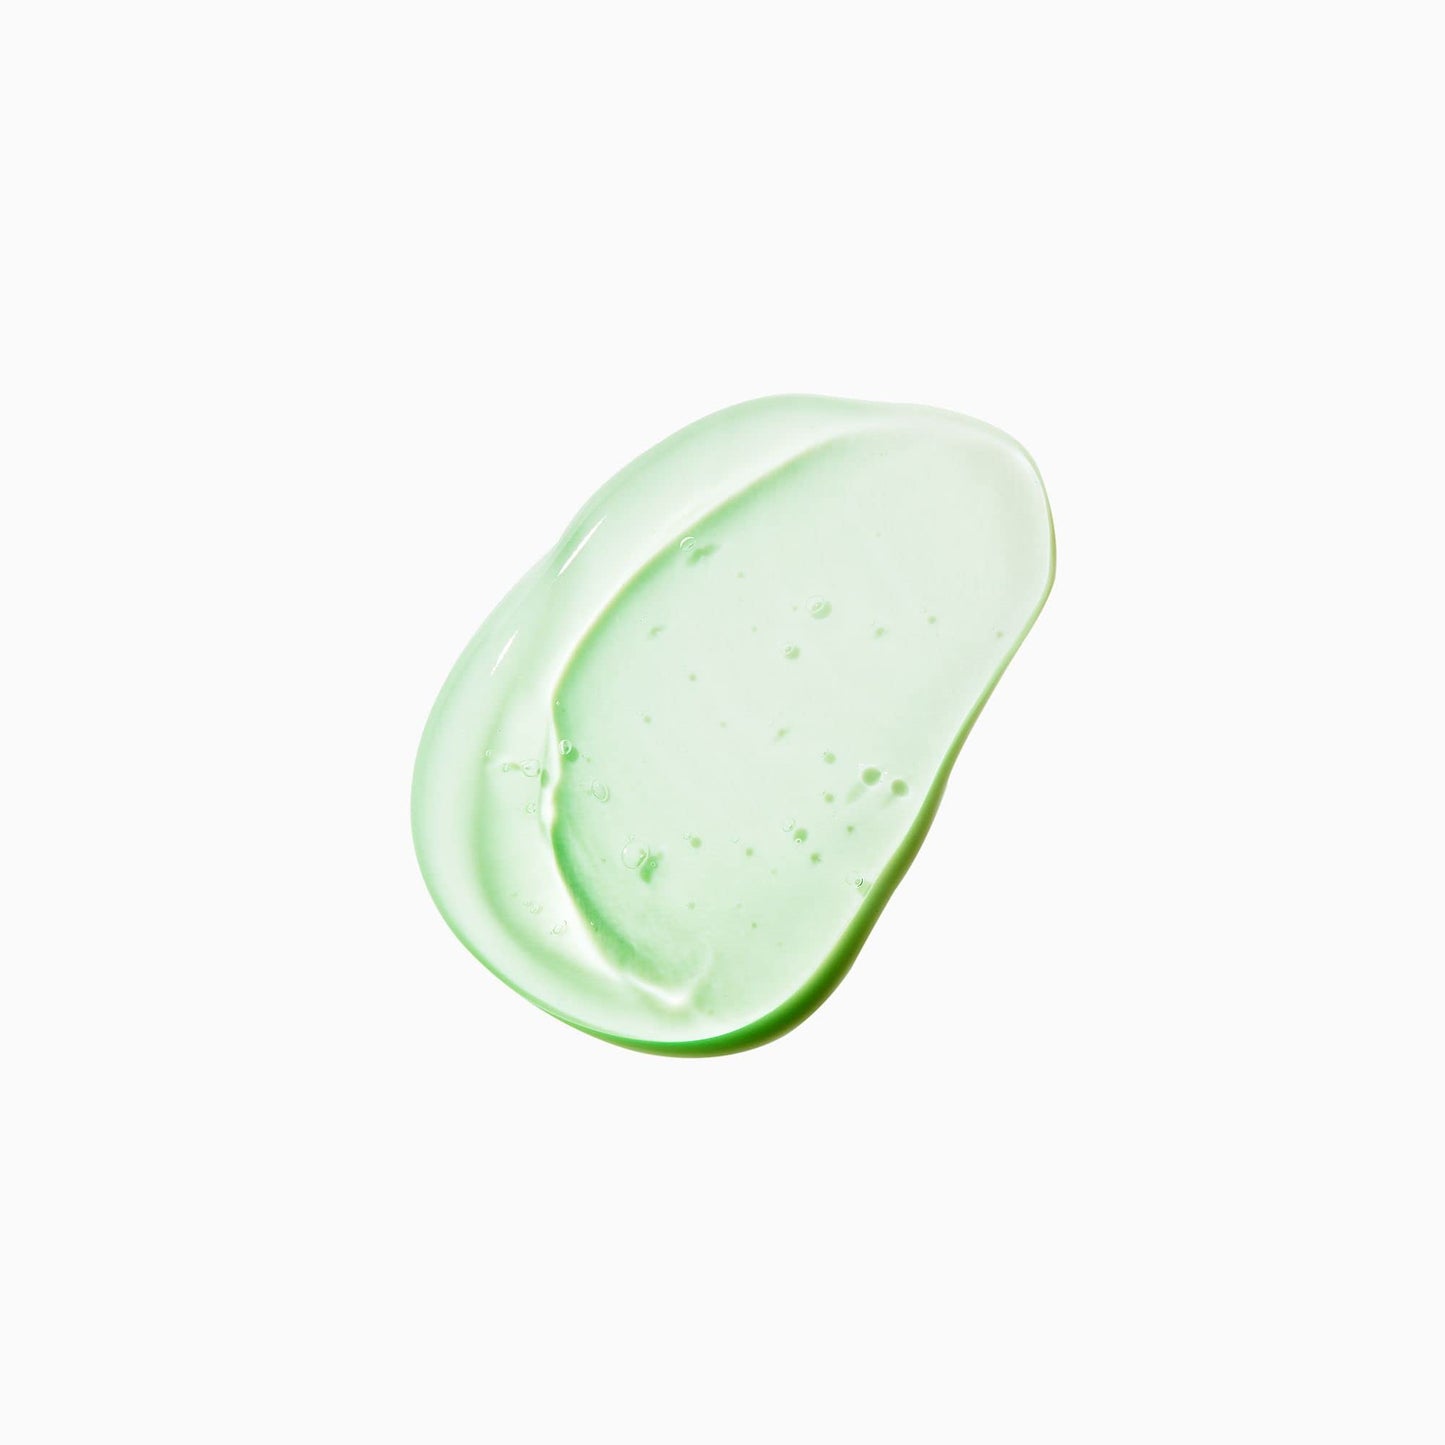 Cooling jelly mask-Yes to